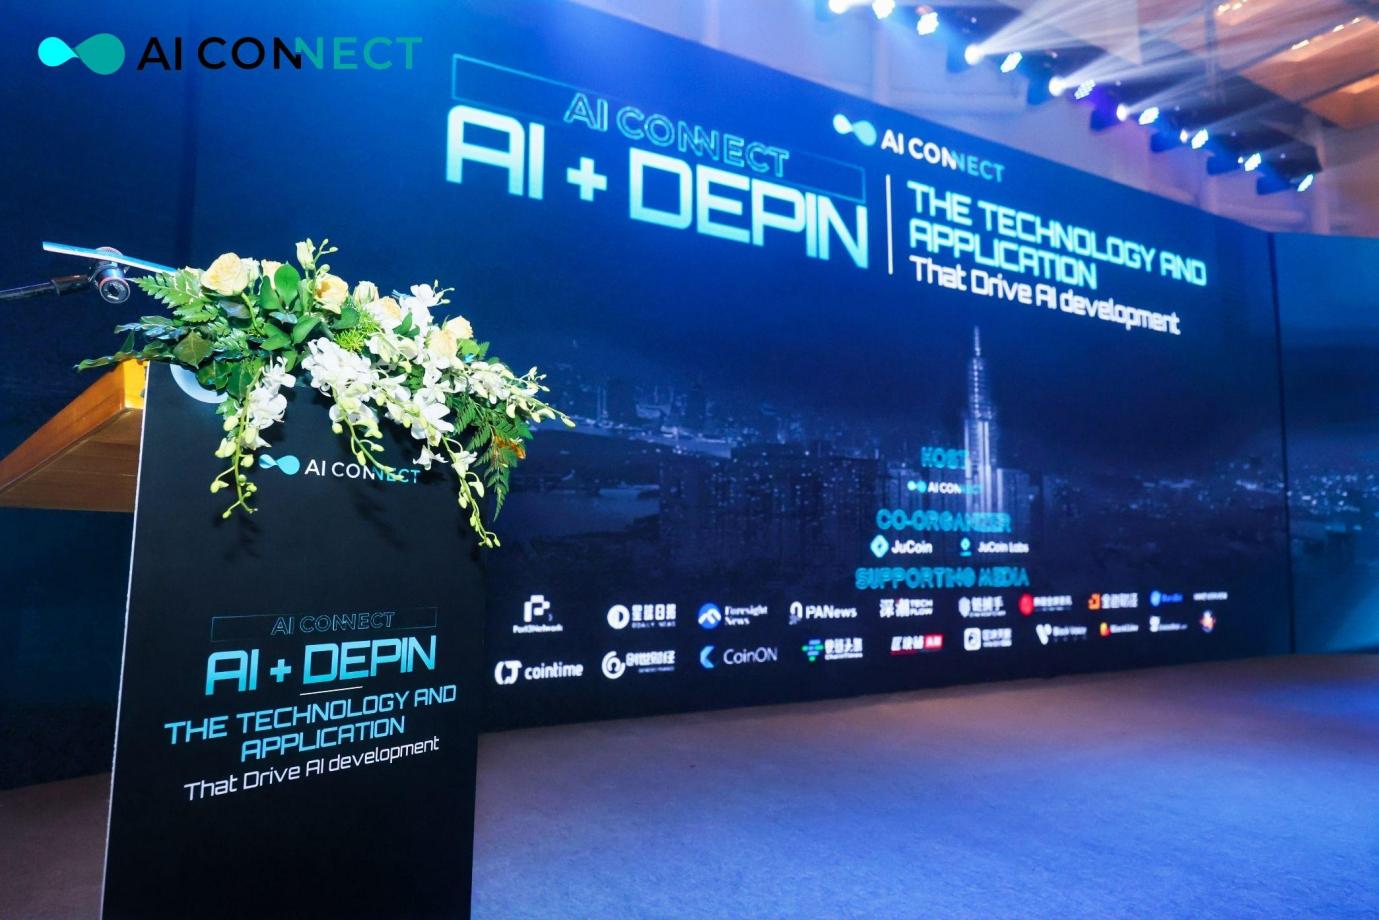 , AIConnect Empowerment: AI+DePIN Technology and Application Summit Concludes Successfully